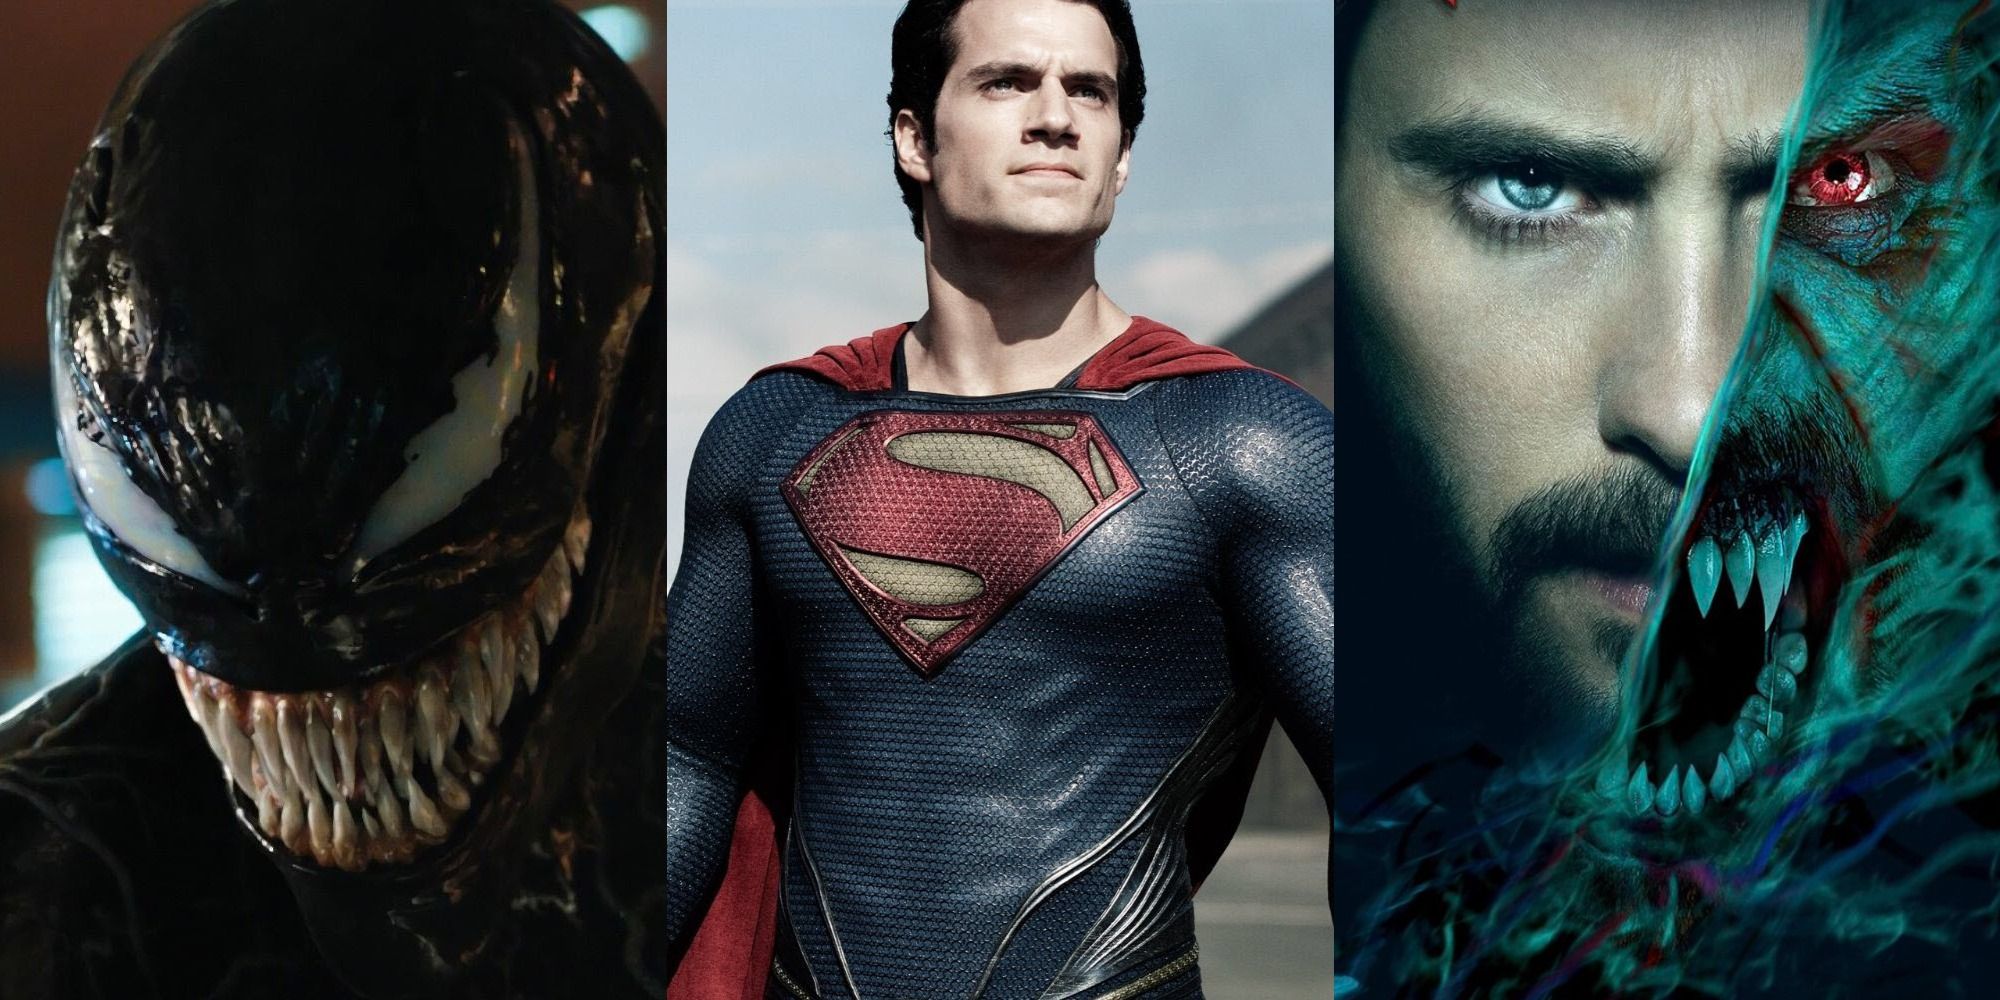 combined images of Henry Cavill as Superman, Venom, and Jared Leto as Morbius